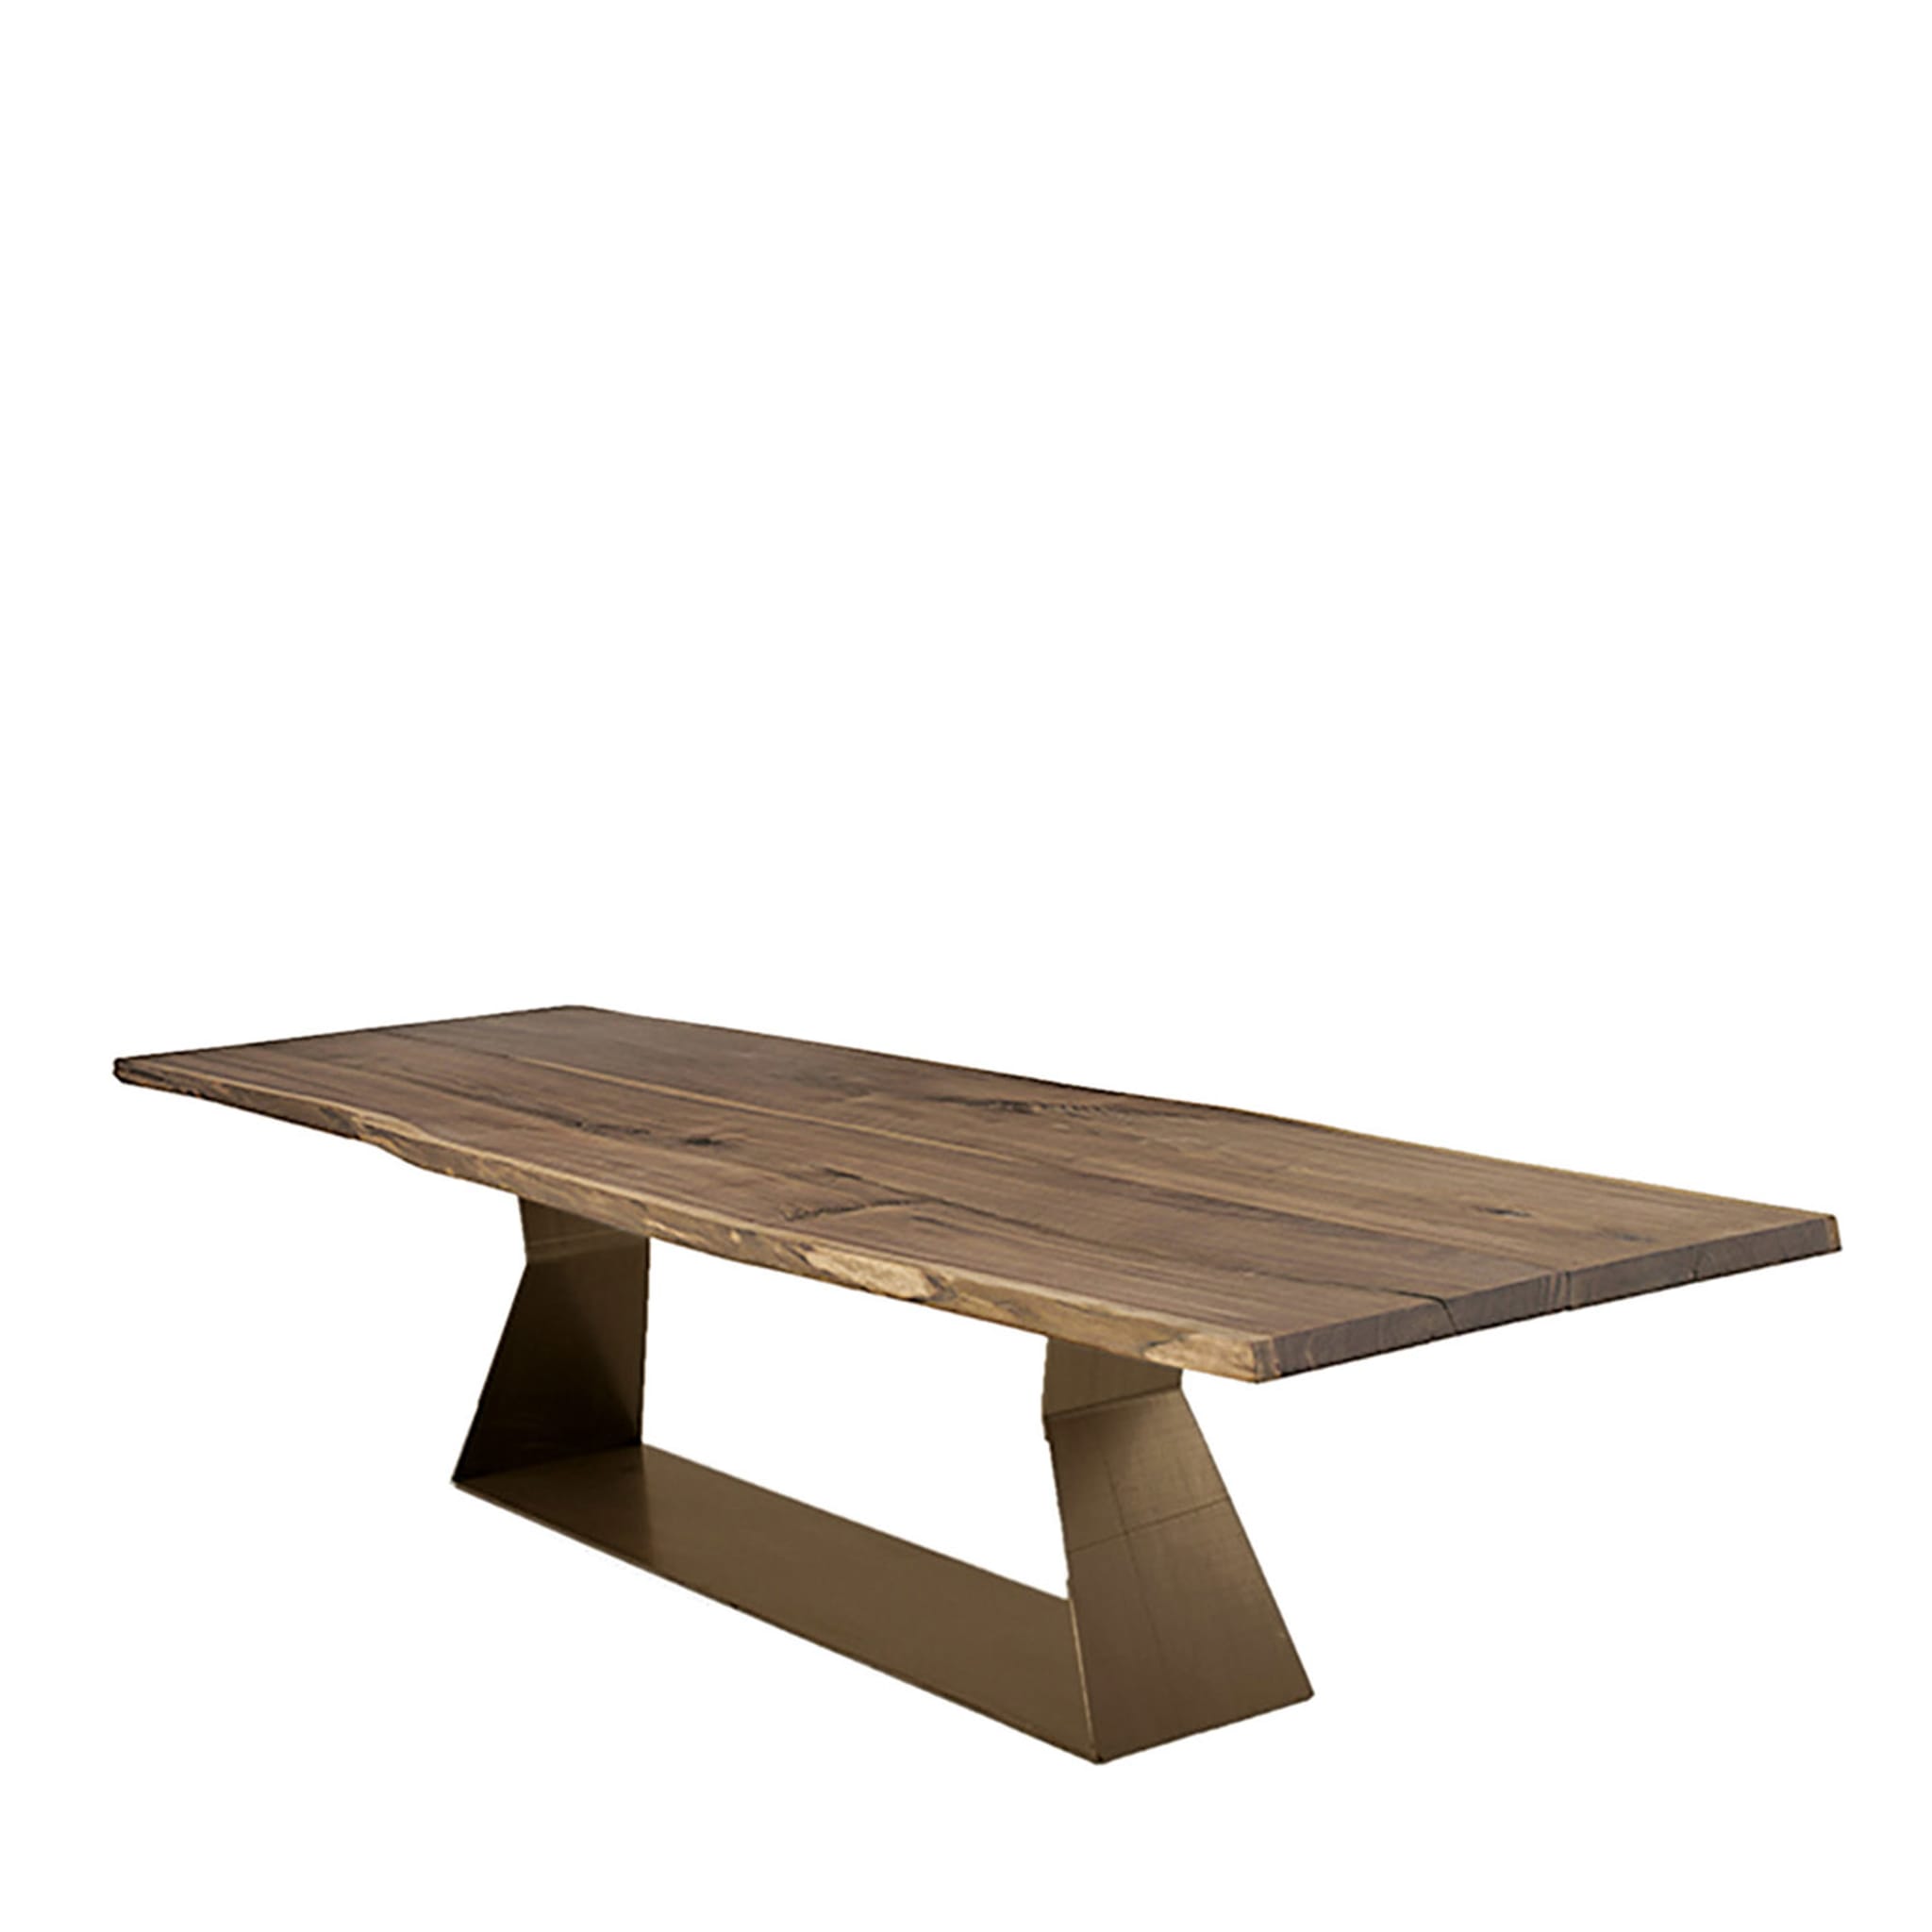 Bedrock Plank C Table by Terry Dwan - Main view